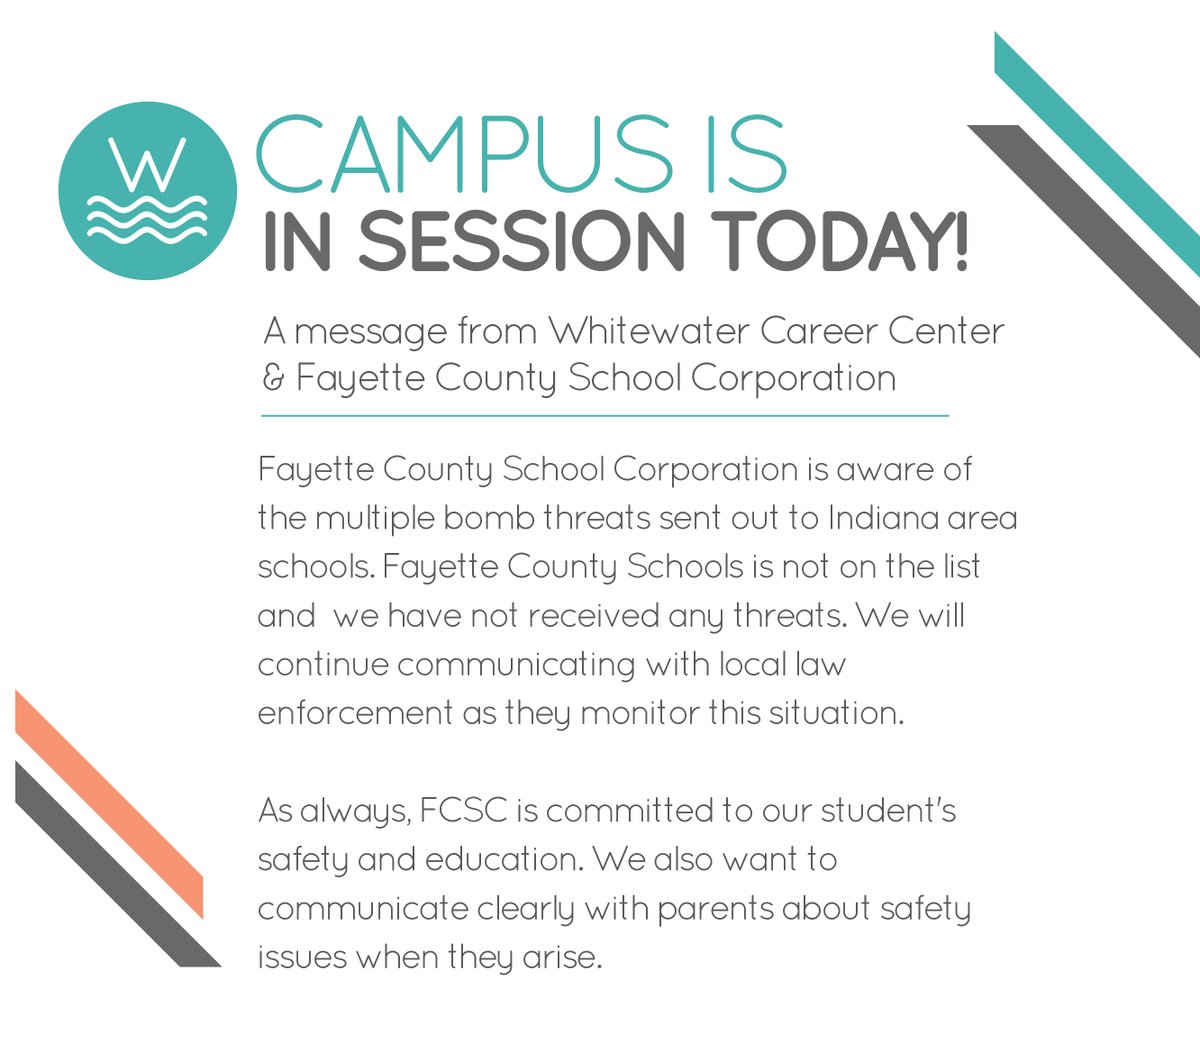 WCC is open today, April 14, 2023. Please see the below message from WCC and Fayette County School Corporation.